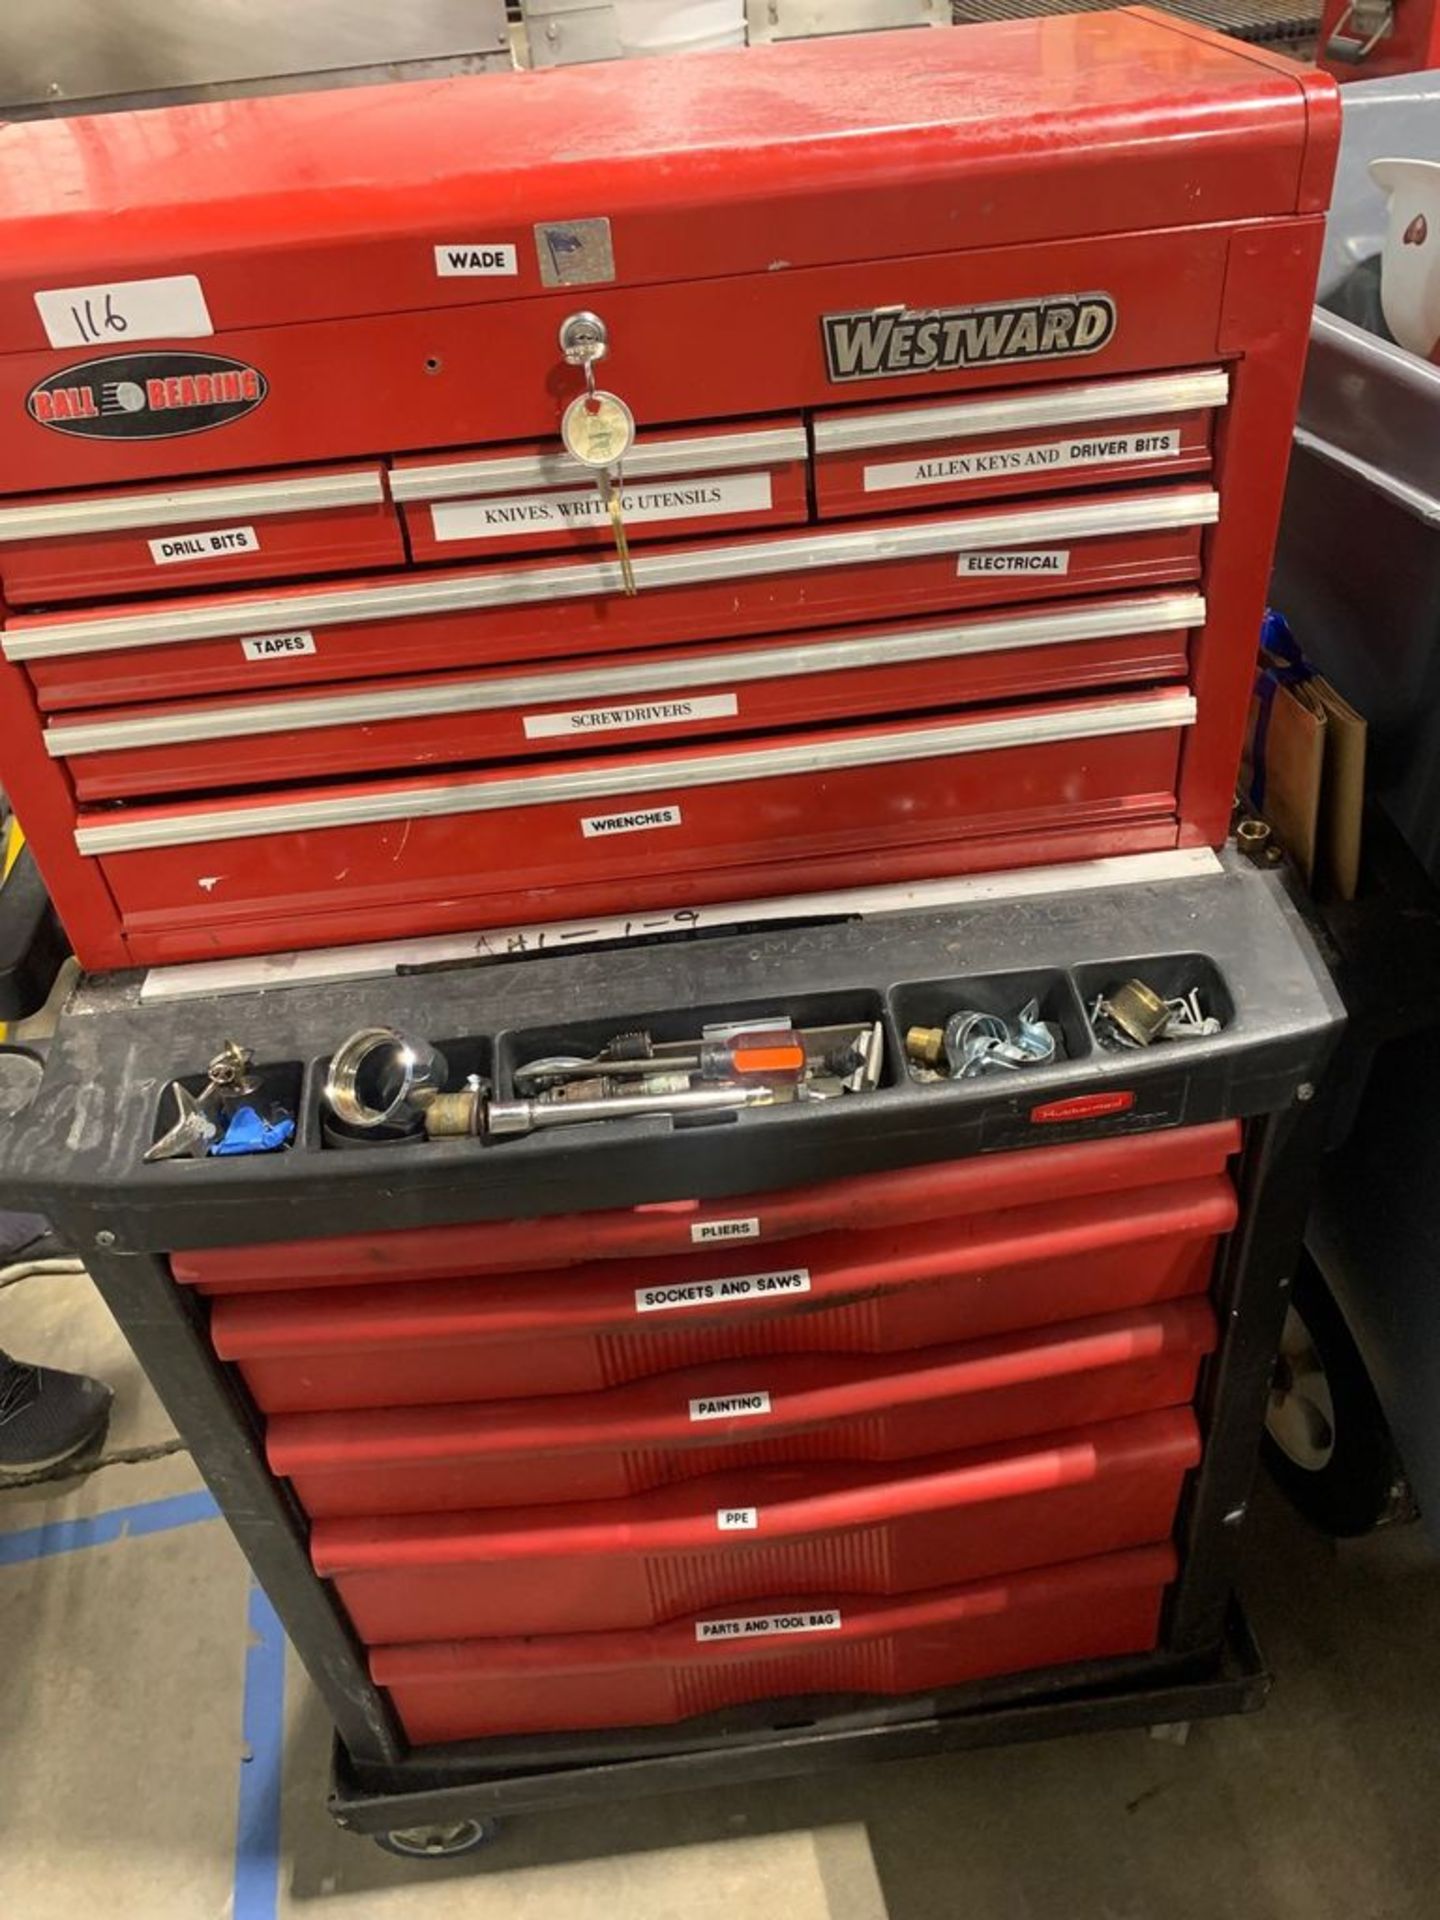 WESTWARD TOOL CHEST ON ROLLING CART, CONTENTS INCLUDED - Image 3 of 11